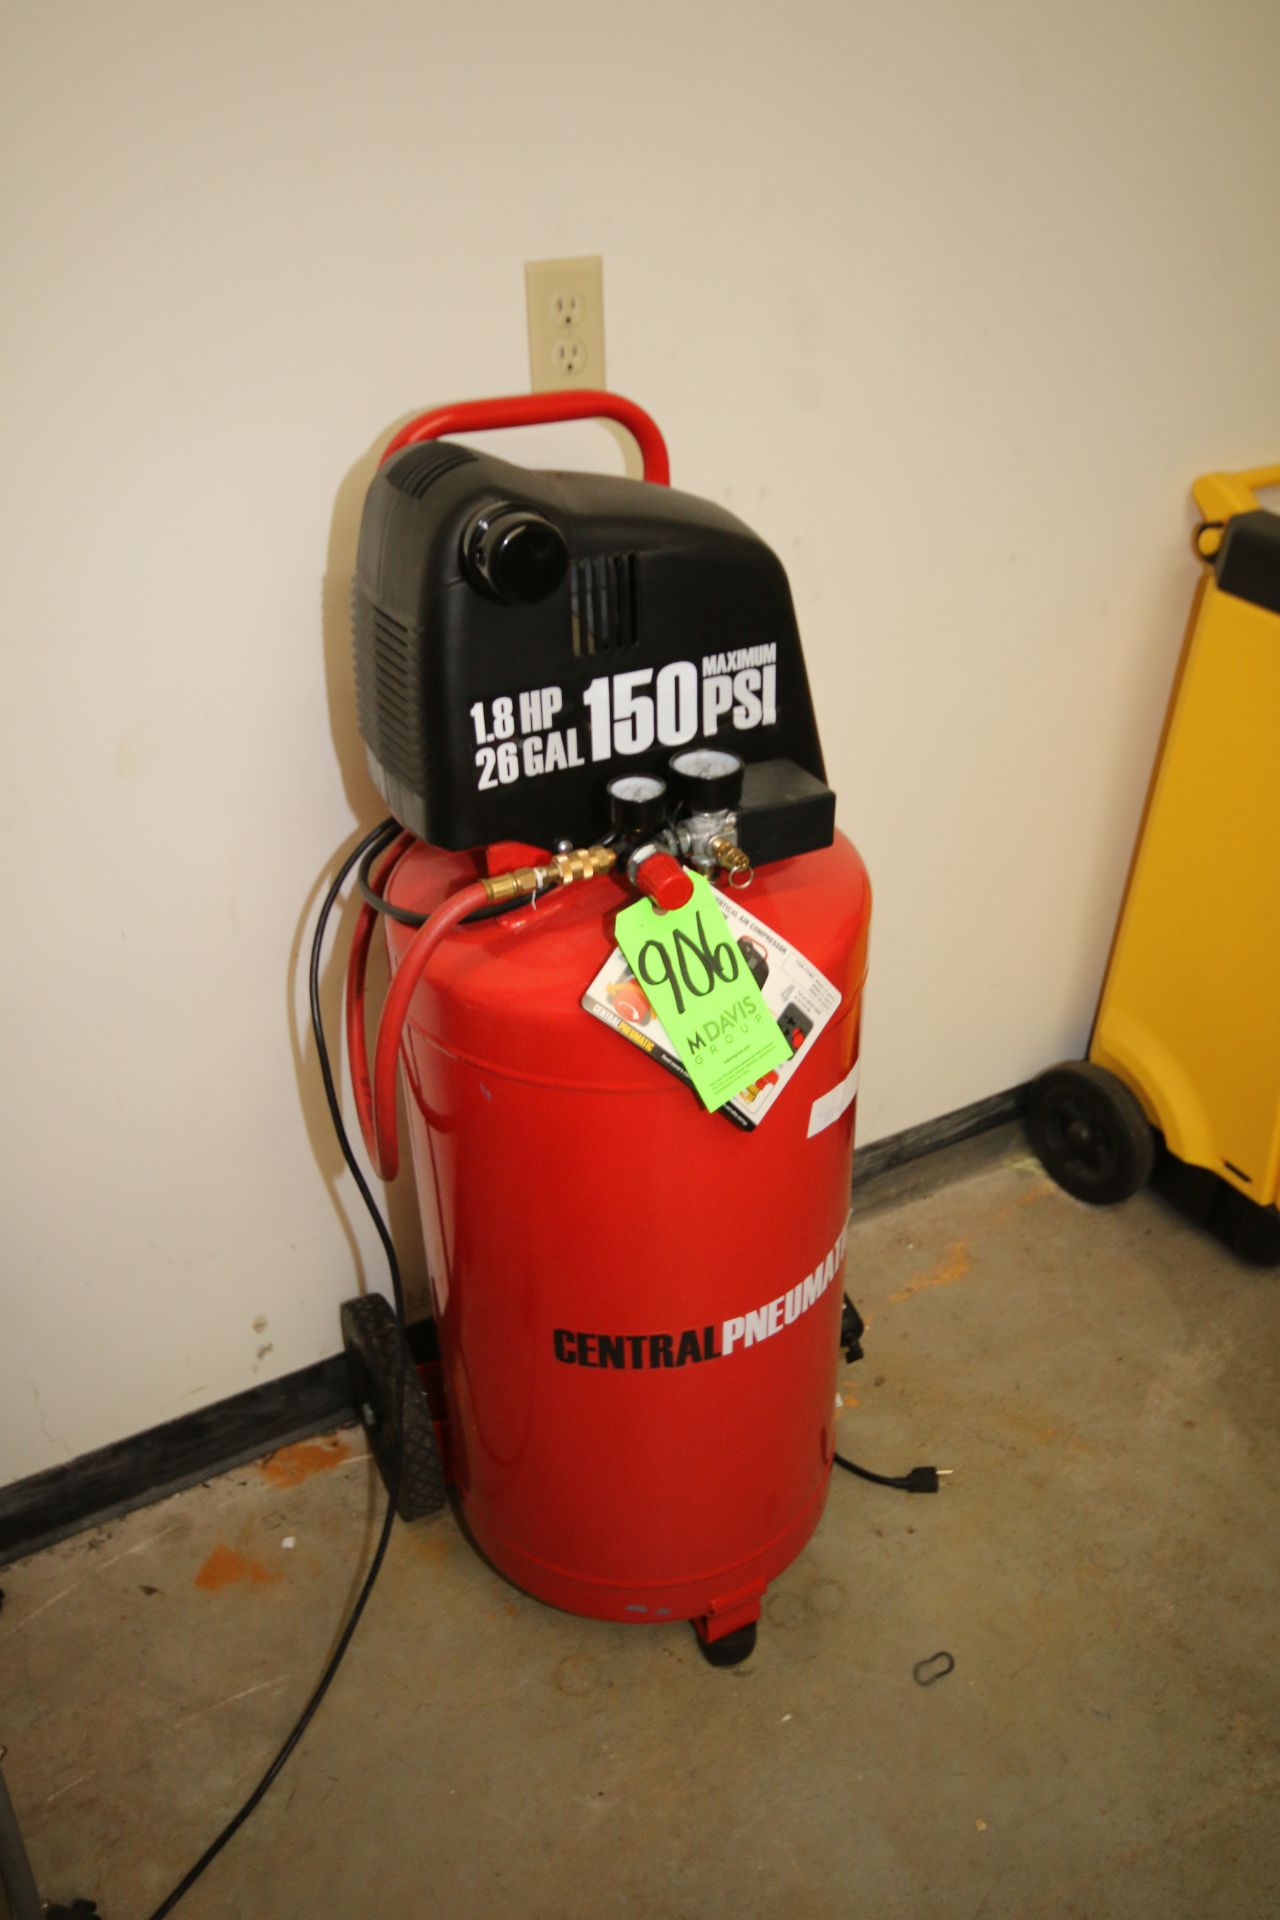 Central Pneumatic 26 Gal. Vertical Air Compressor, 150 PSI with 1.8 hp Motor, LOCATED SOUTH